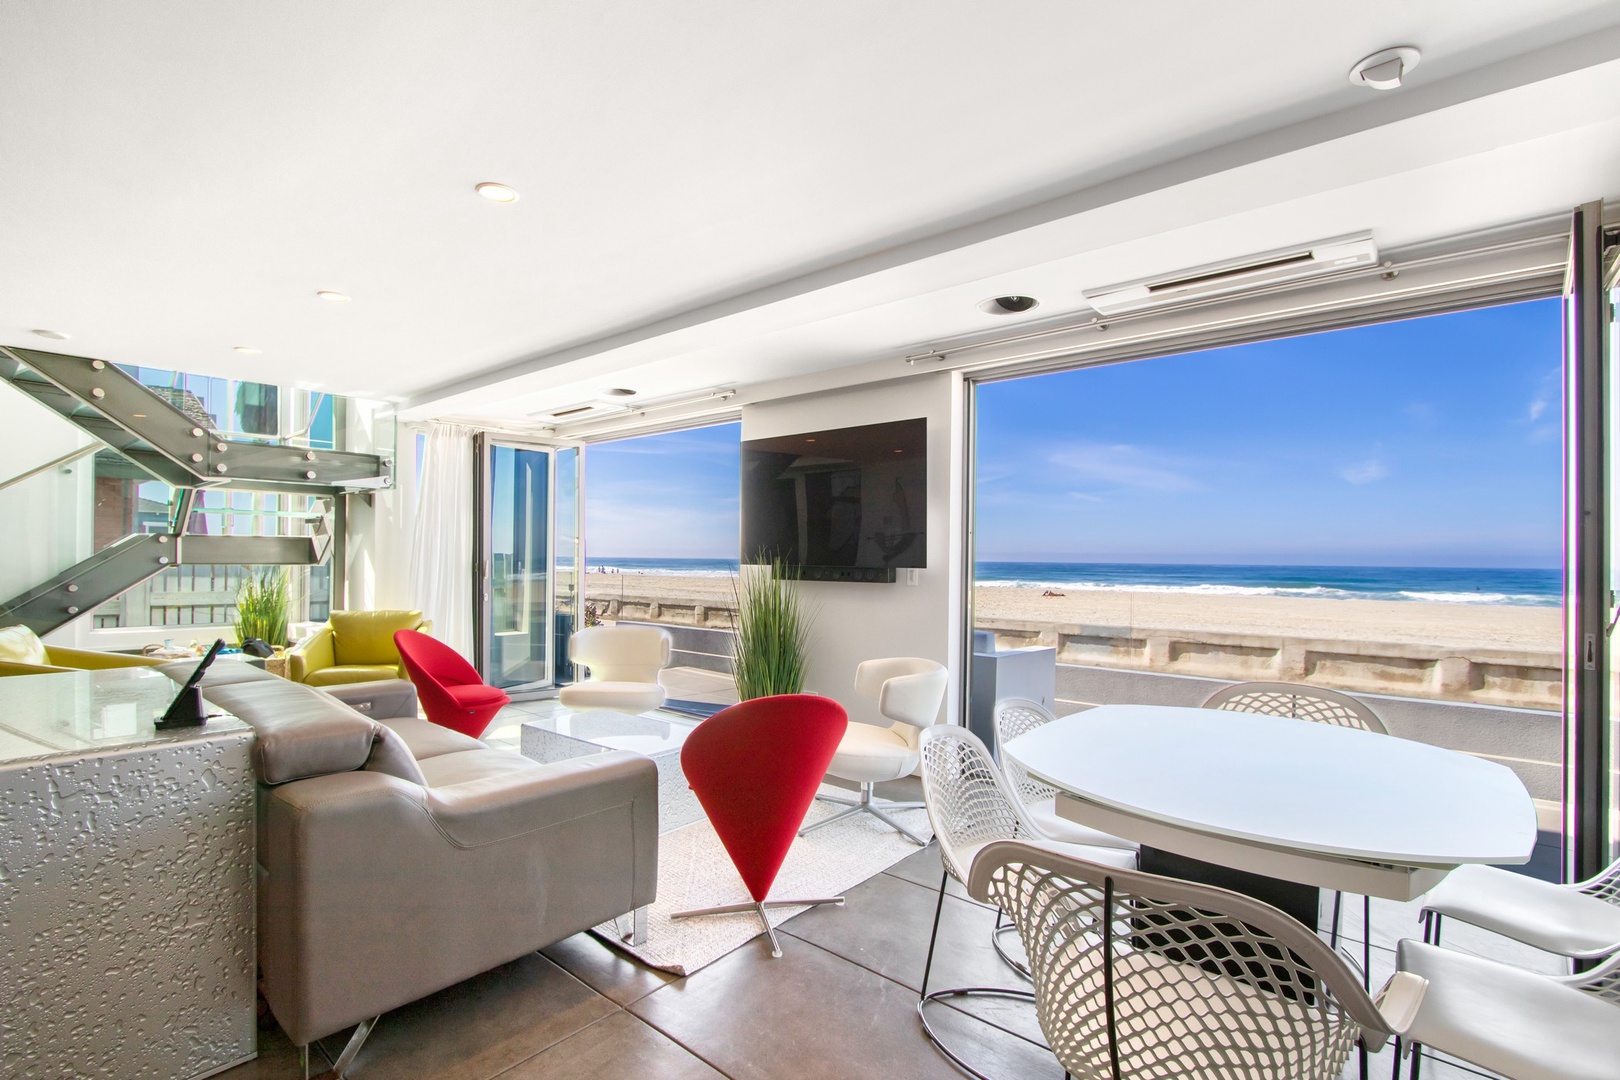 Living area with beach views